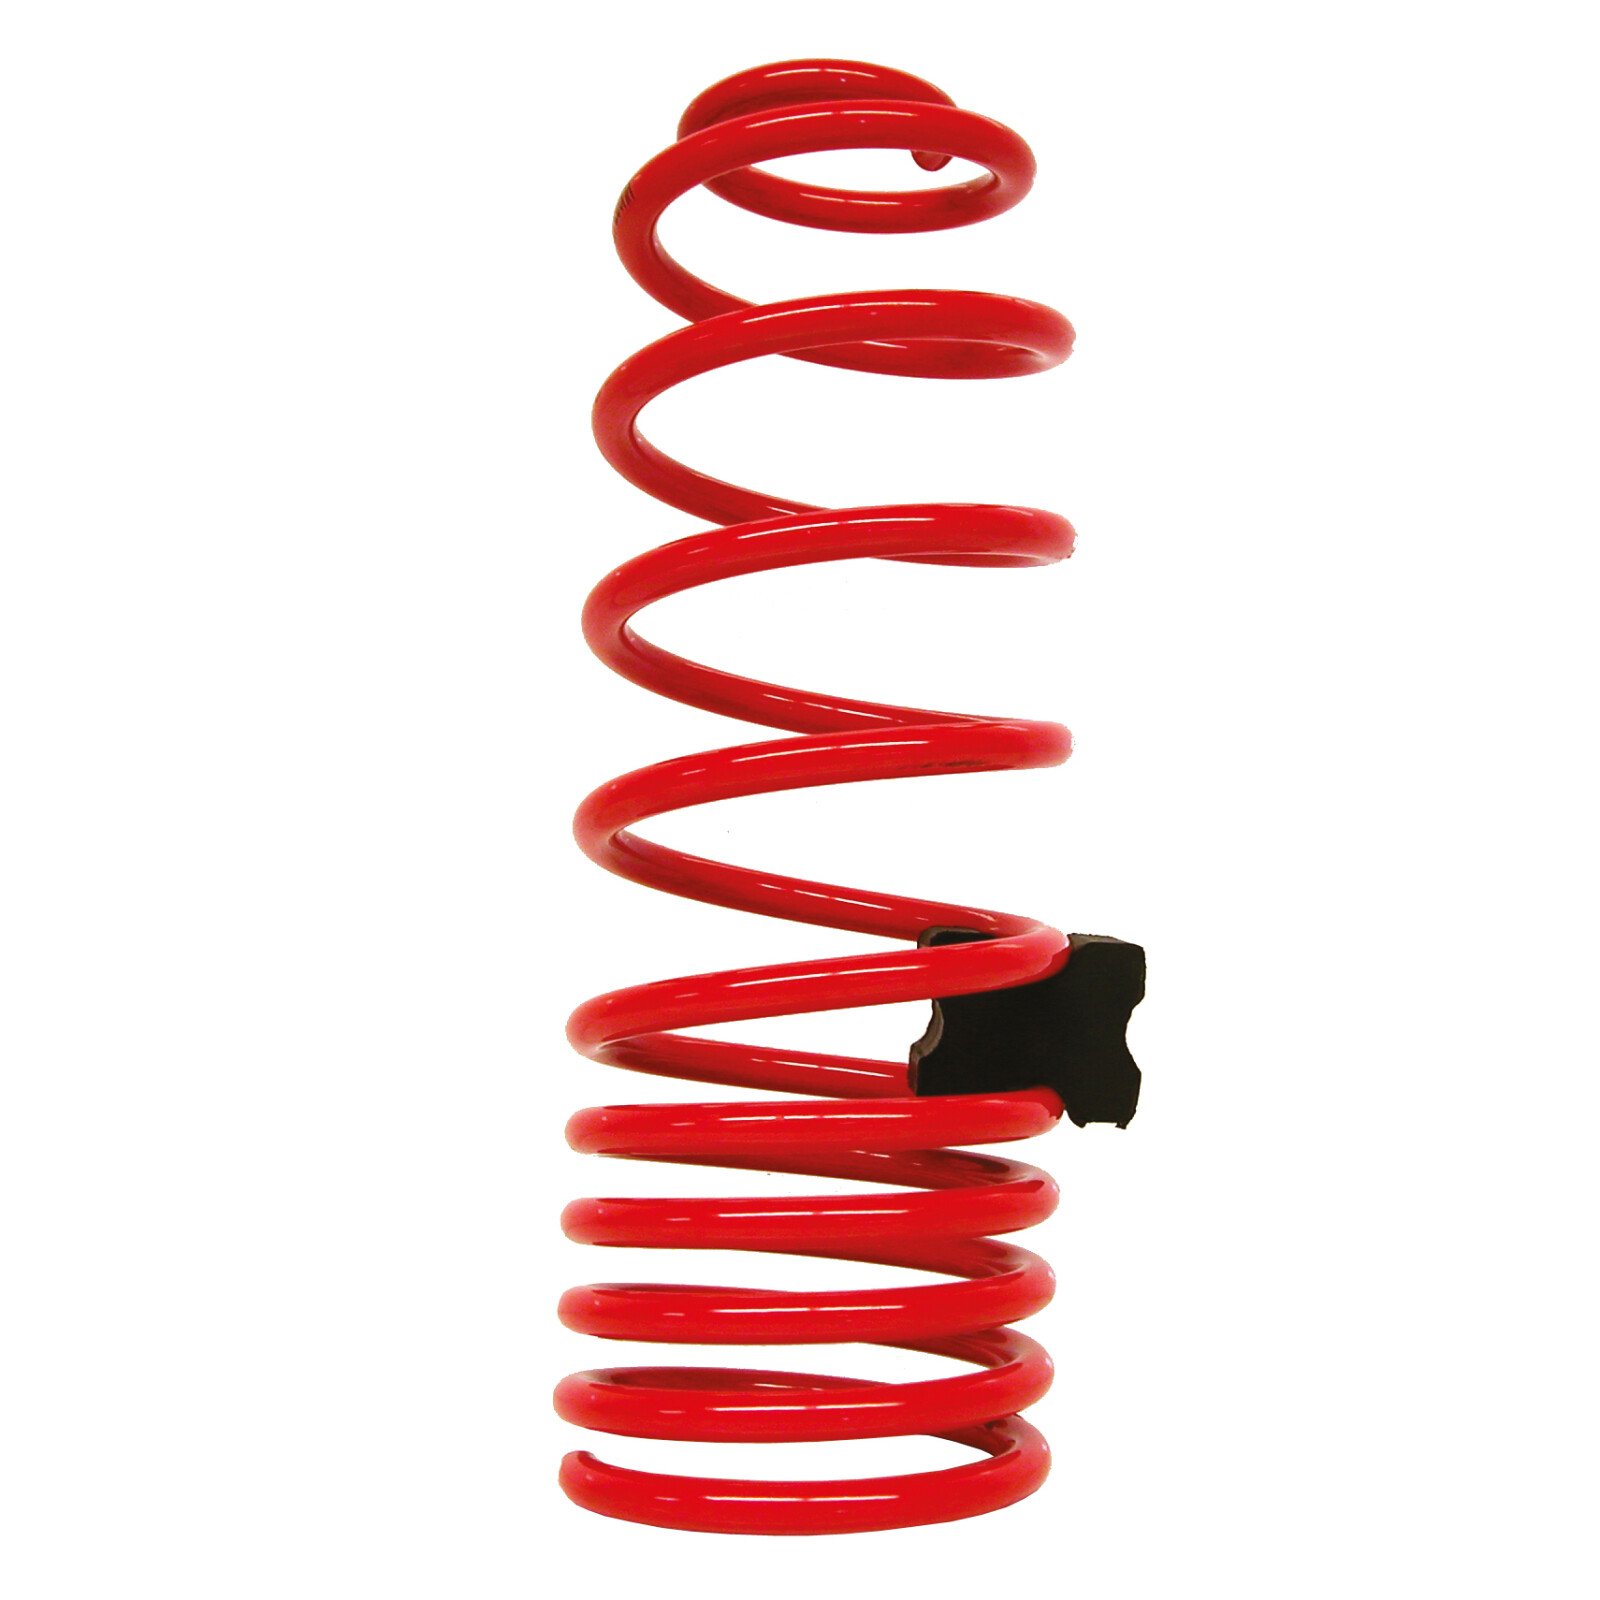 Spacers wound spring suspension thumb